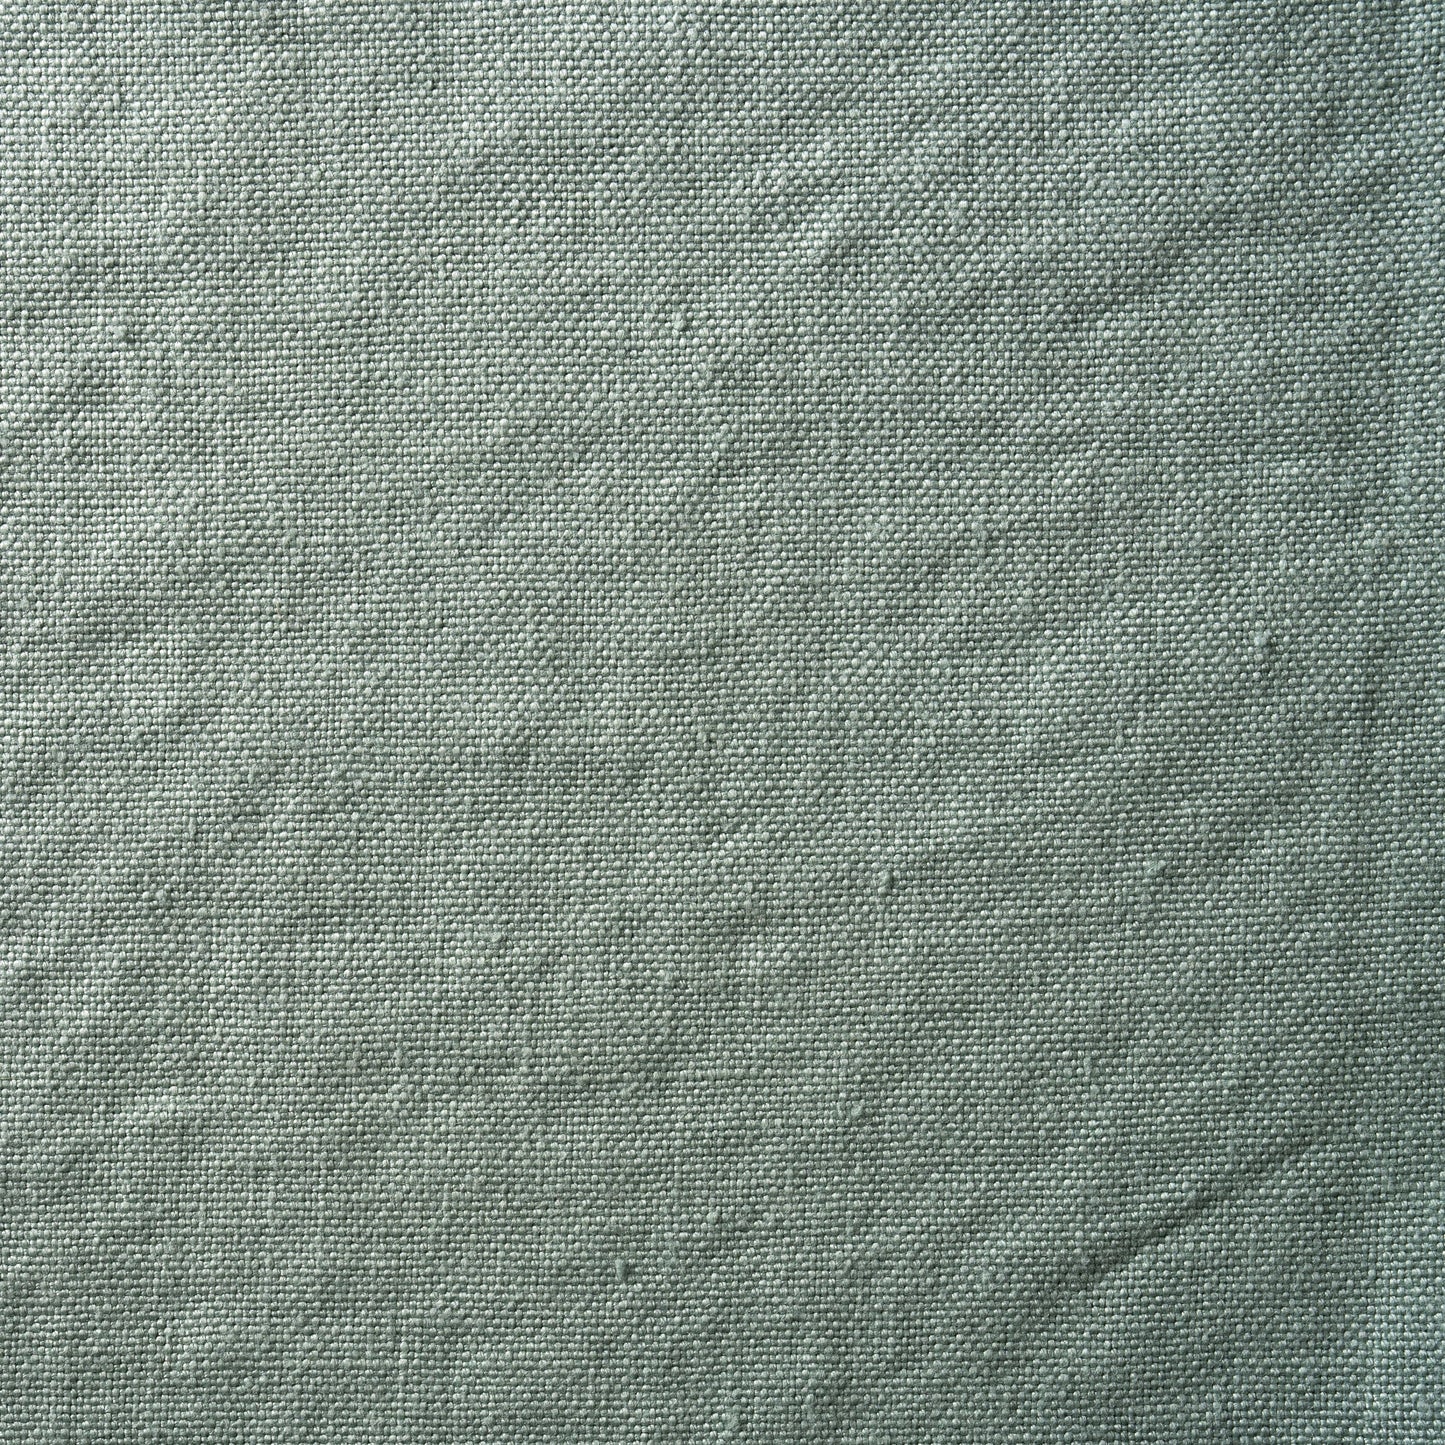 12 oz/sq yard 100% Upholstery/ Slipcover Weight Linen in Surf Crest